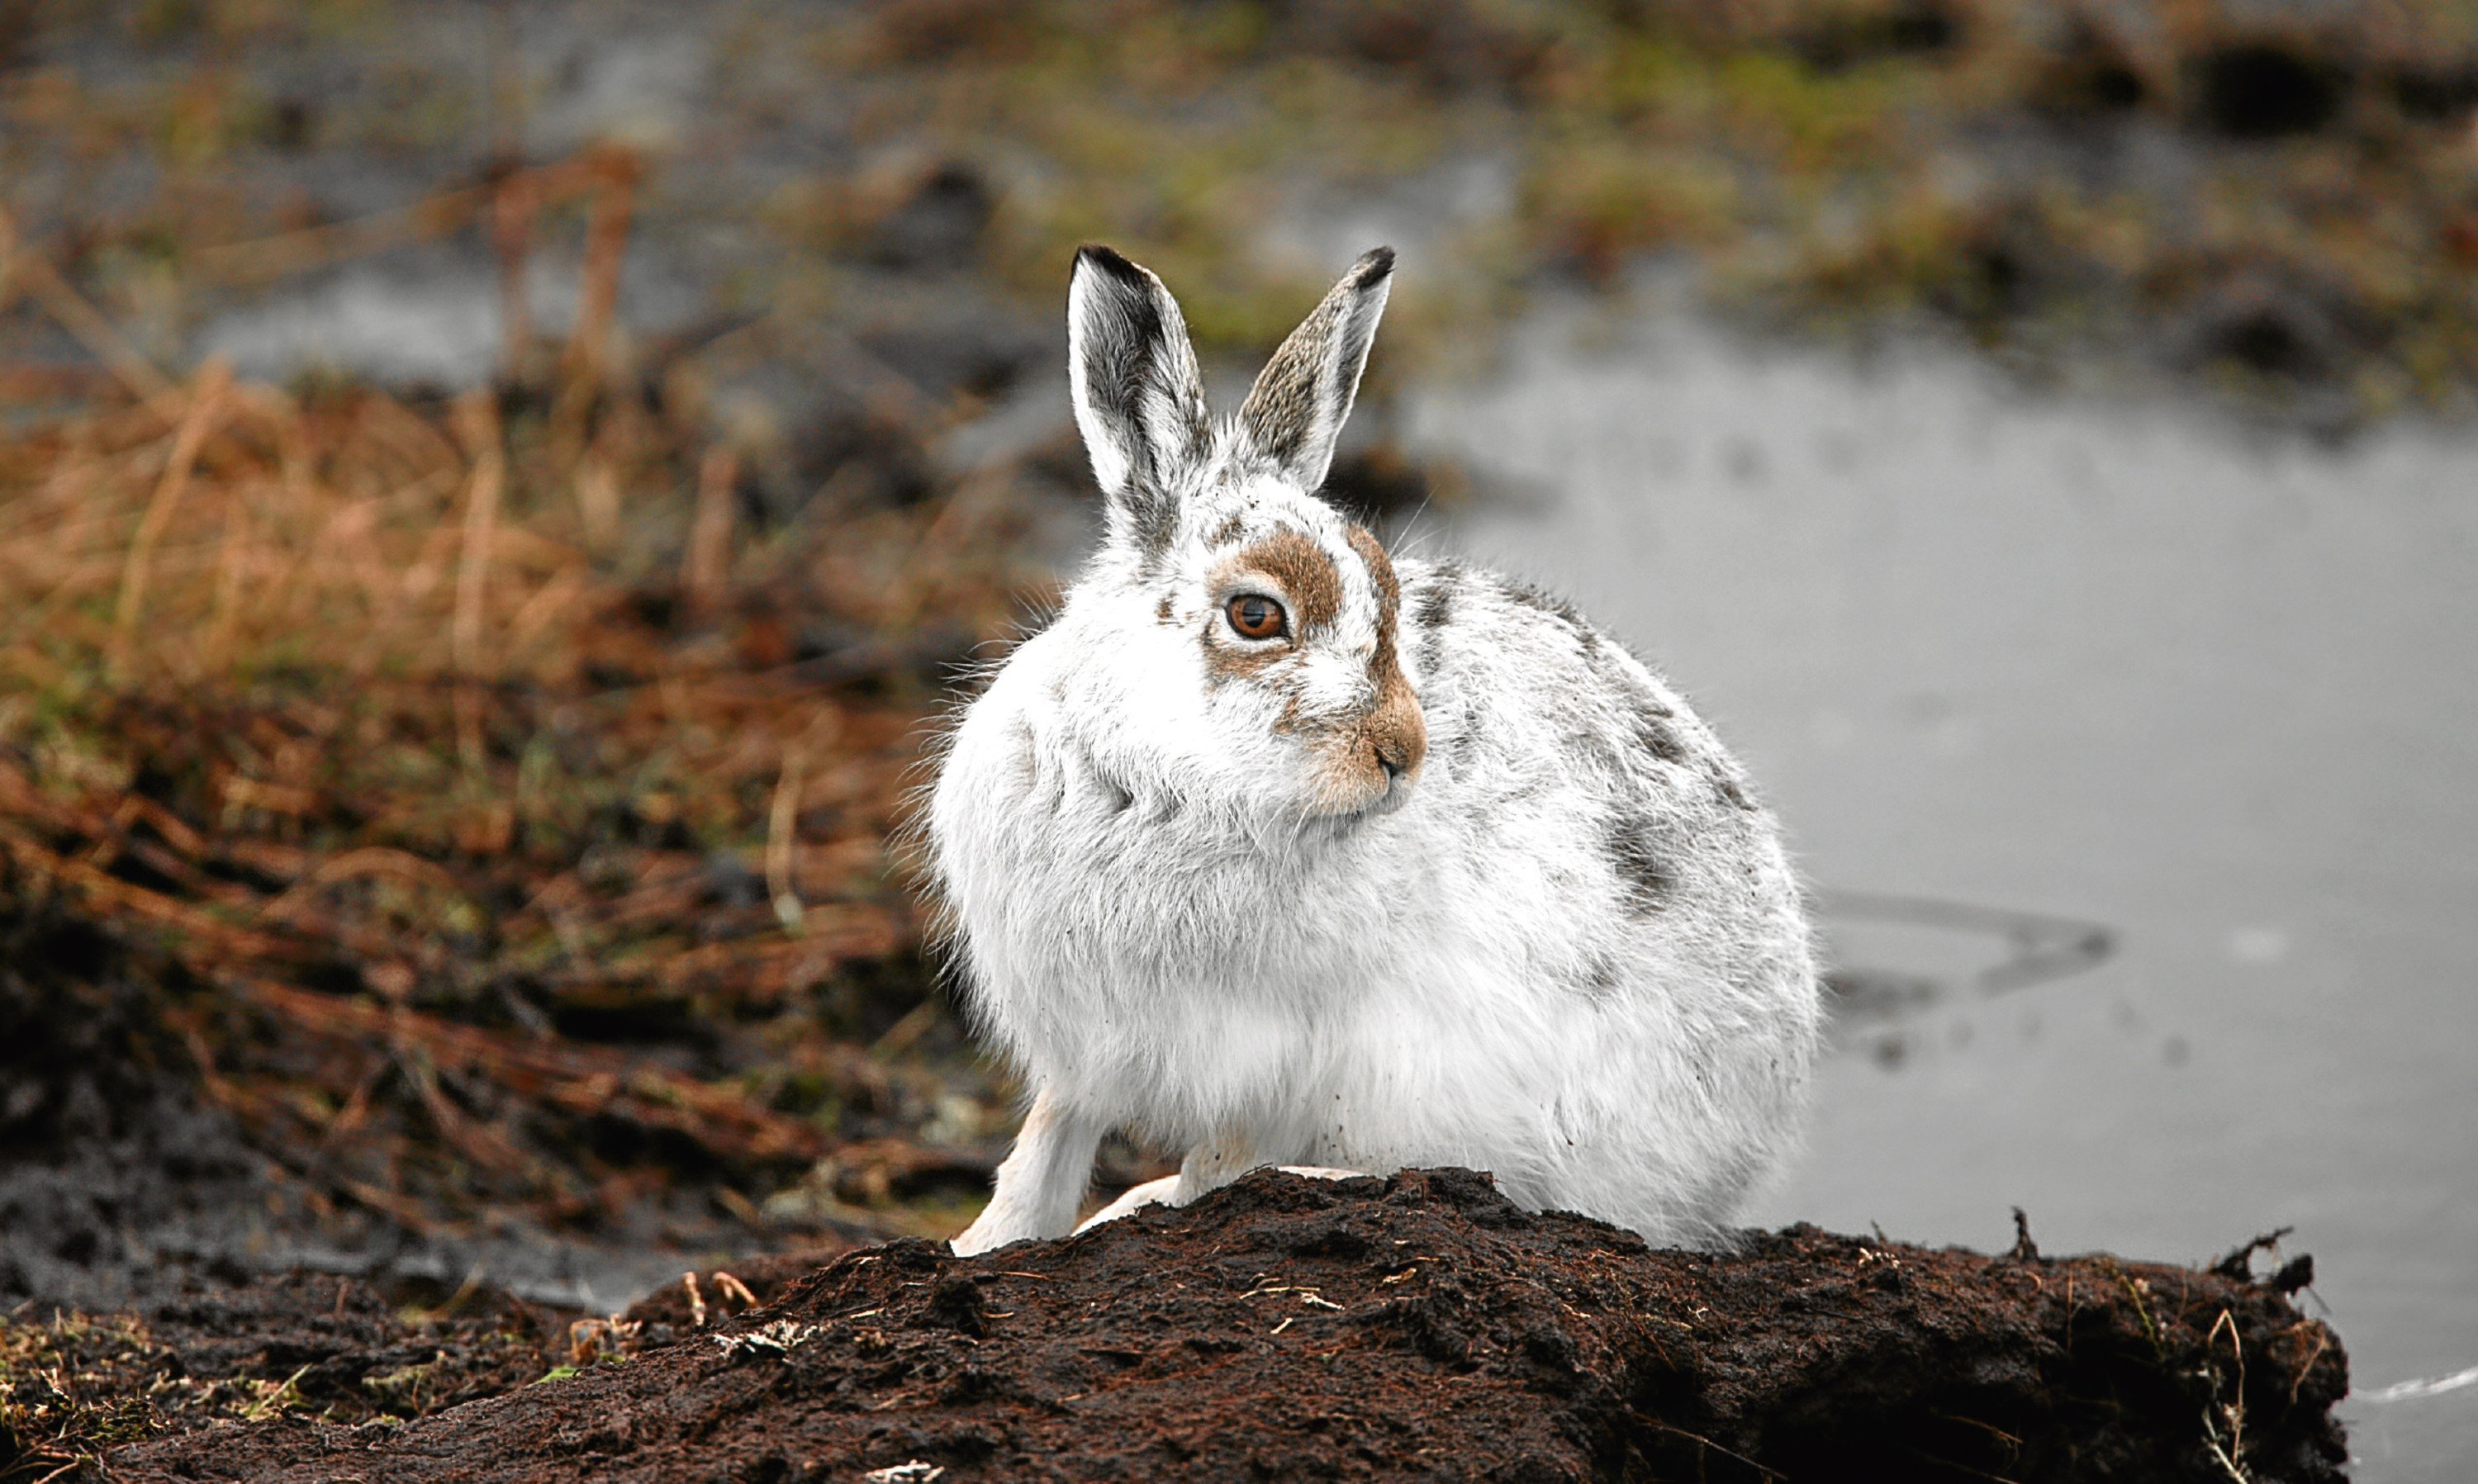 A mountain hare in its winter coat, photographed on moorland.